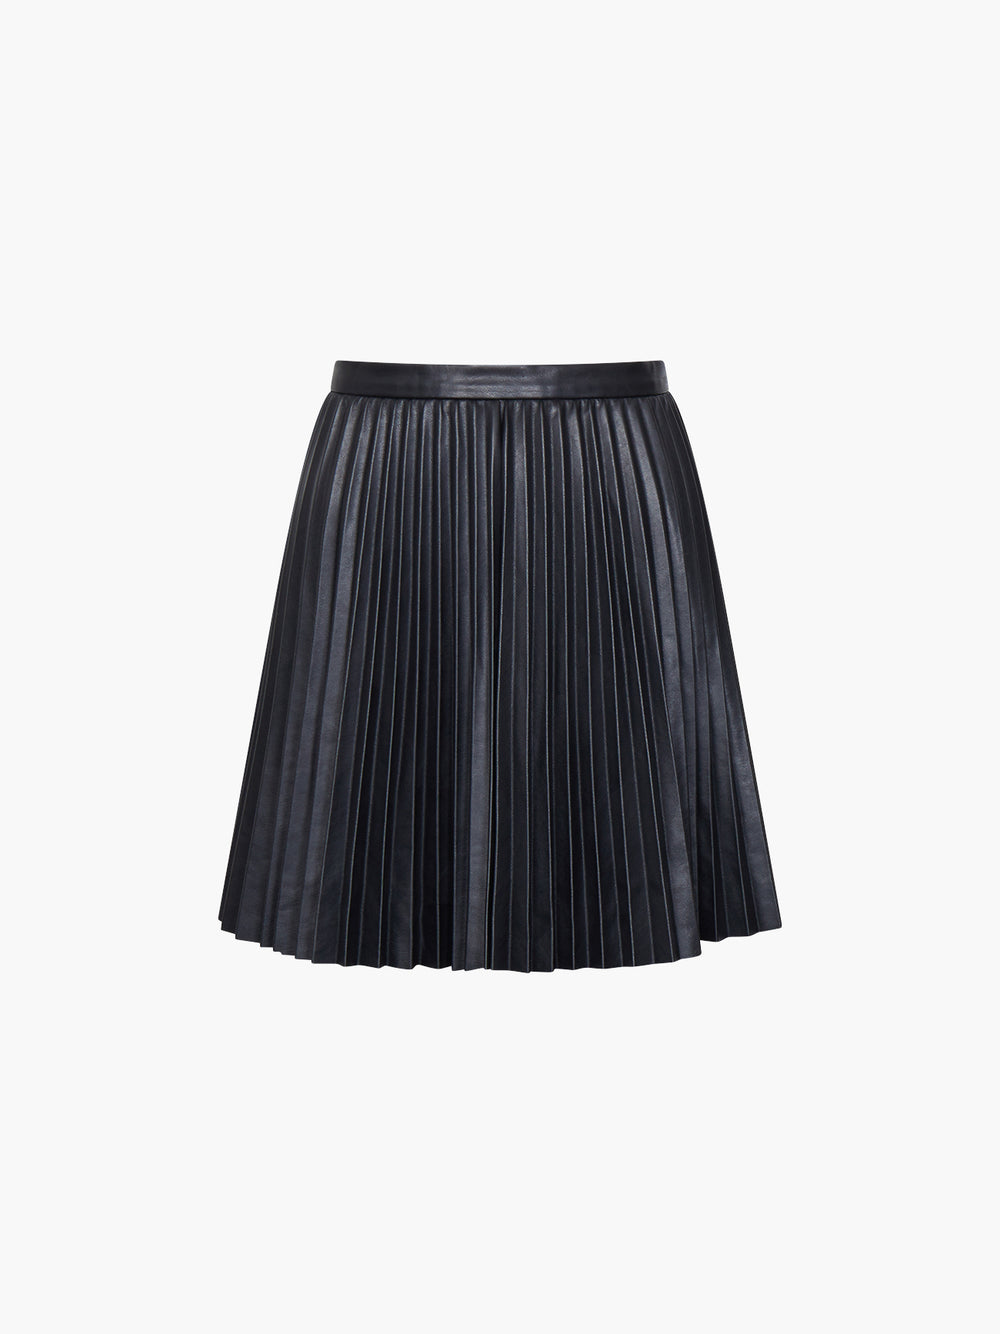 Etta Recycled Vegan Leather Skirt Black | French Connection US